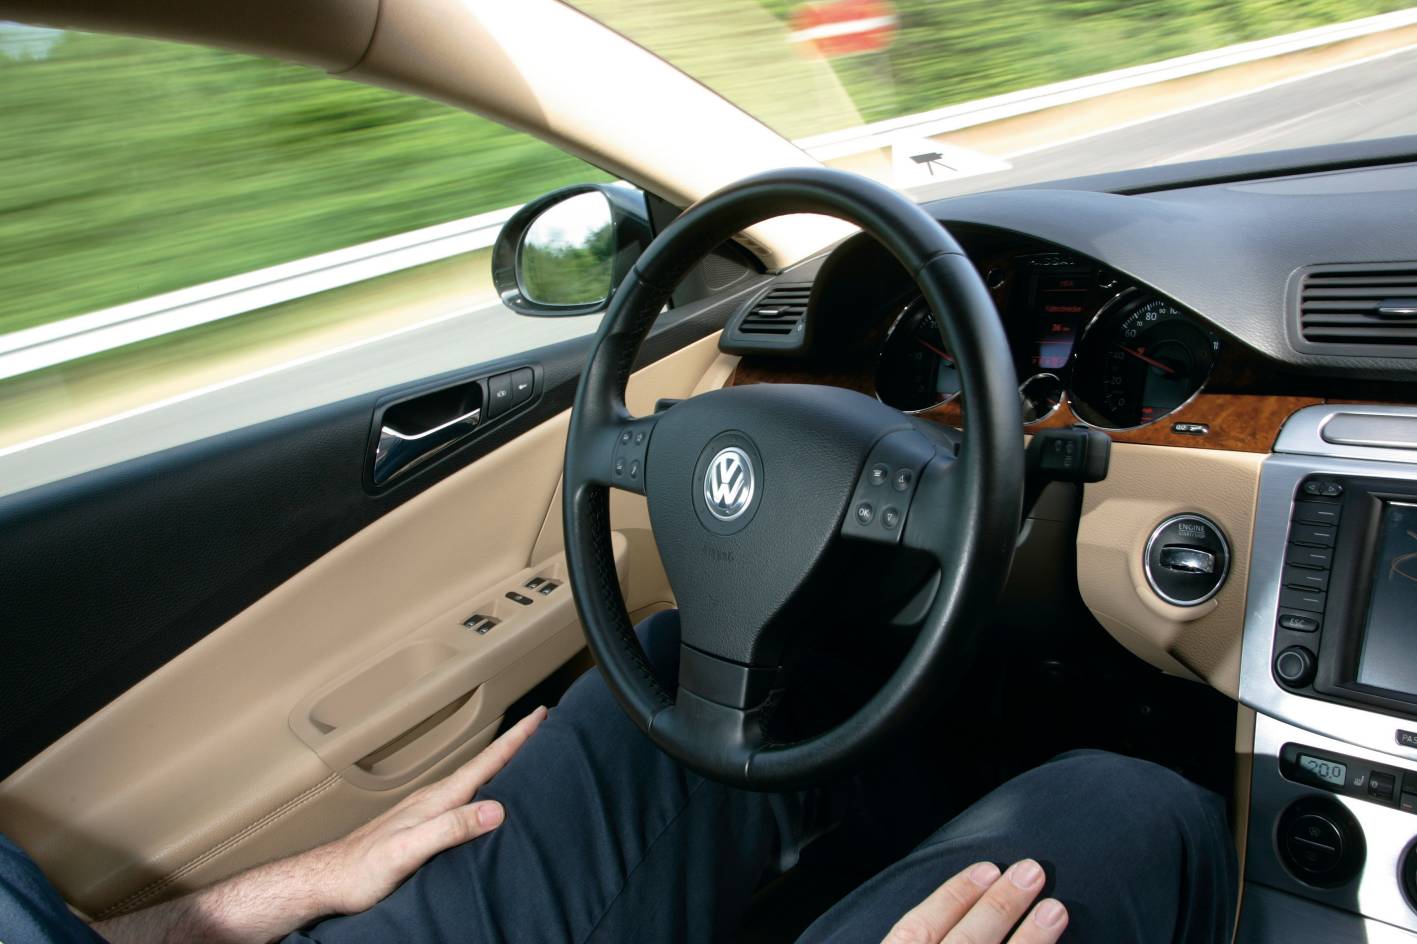 Automated driving research starts in Wolfsburg, Germany